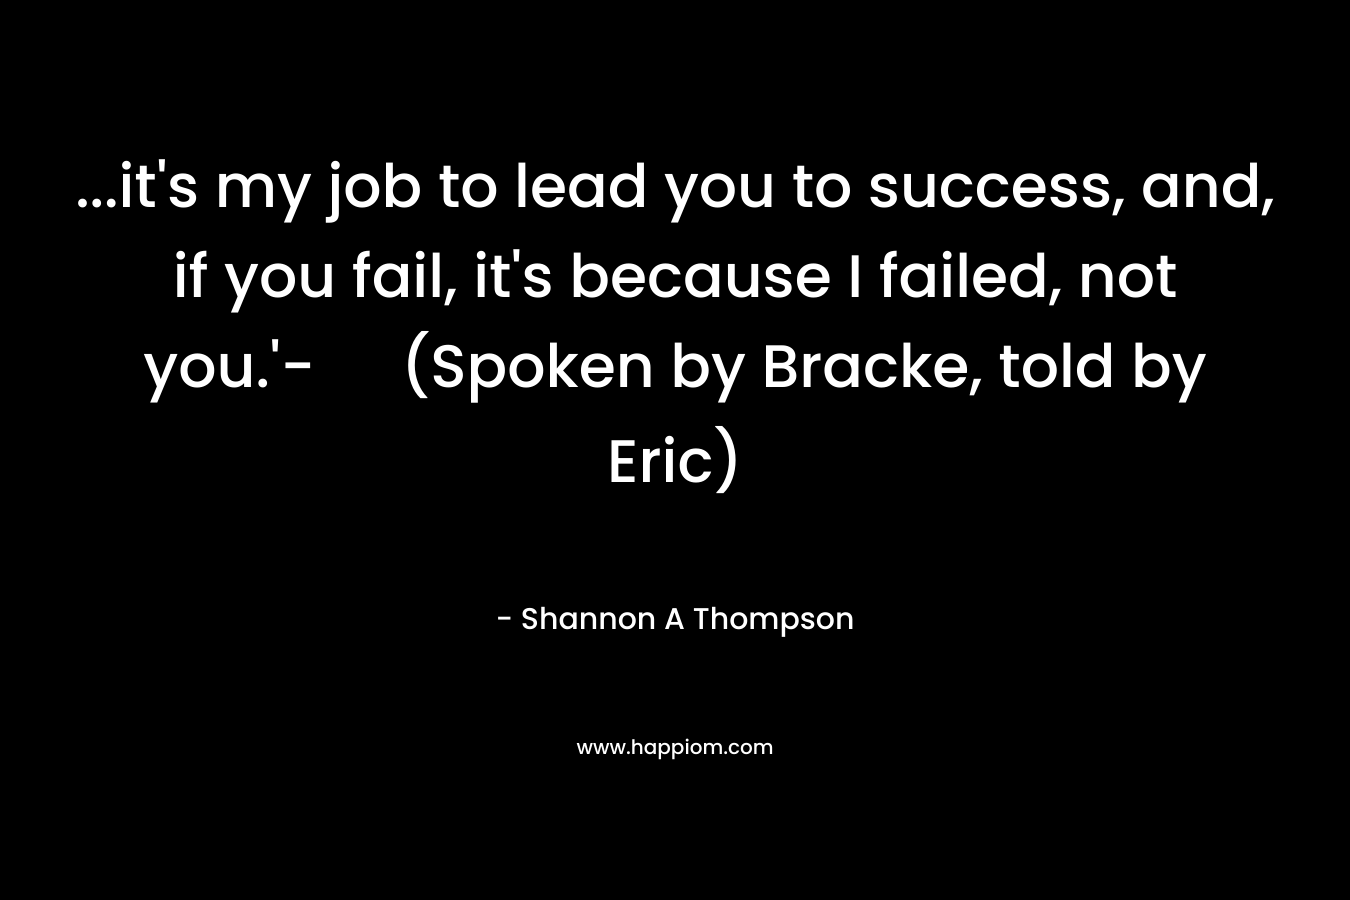 …it’s my job to lead you to success, and, if you fail, it’s because I failed, not you.’- (Spoken by Bracke, told by Eric) – Shannon A Thompson